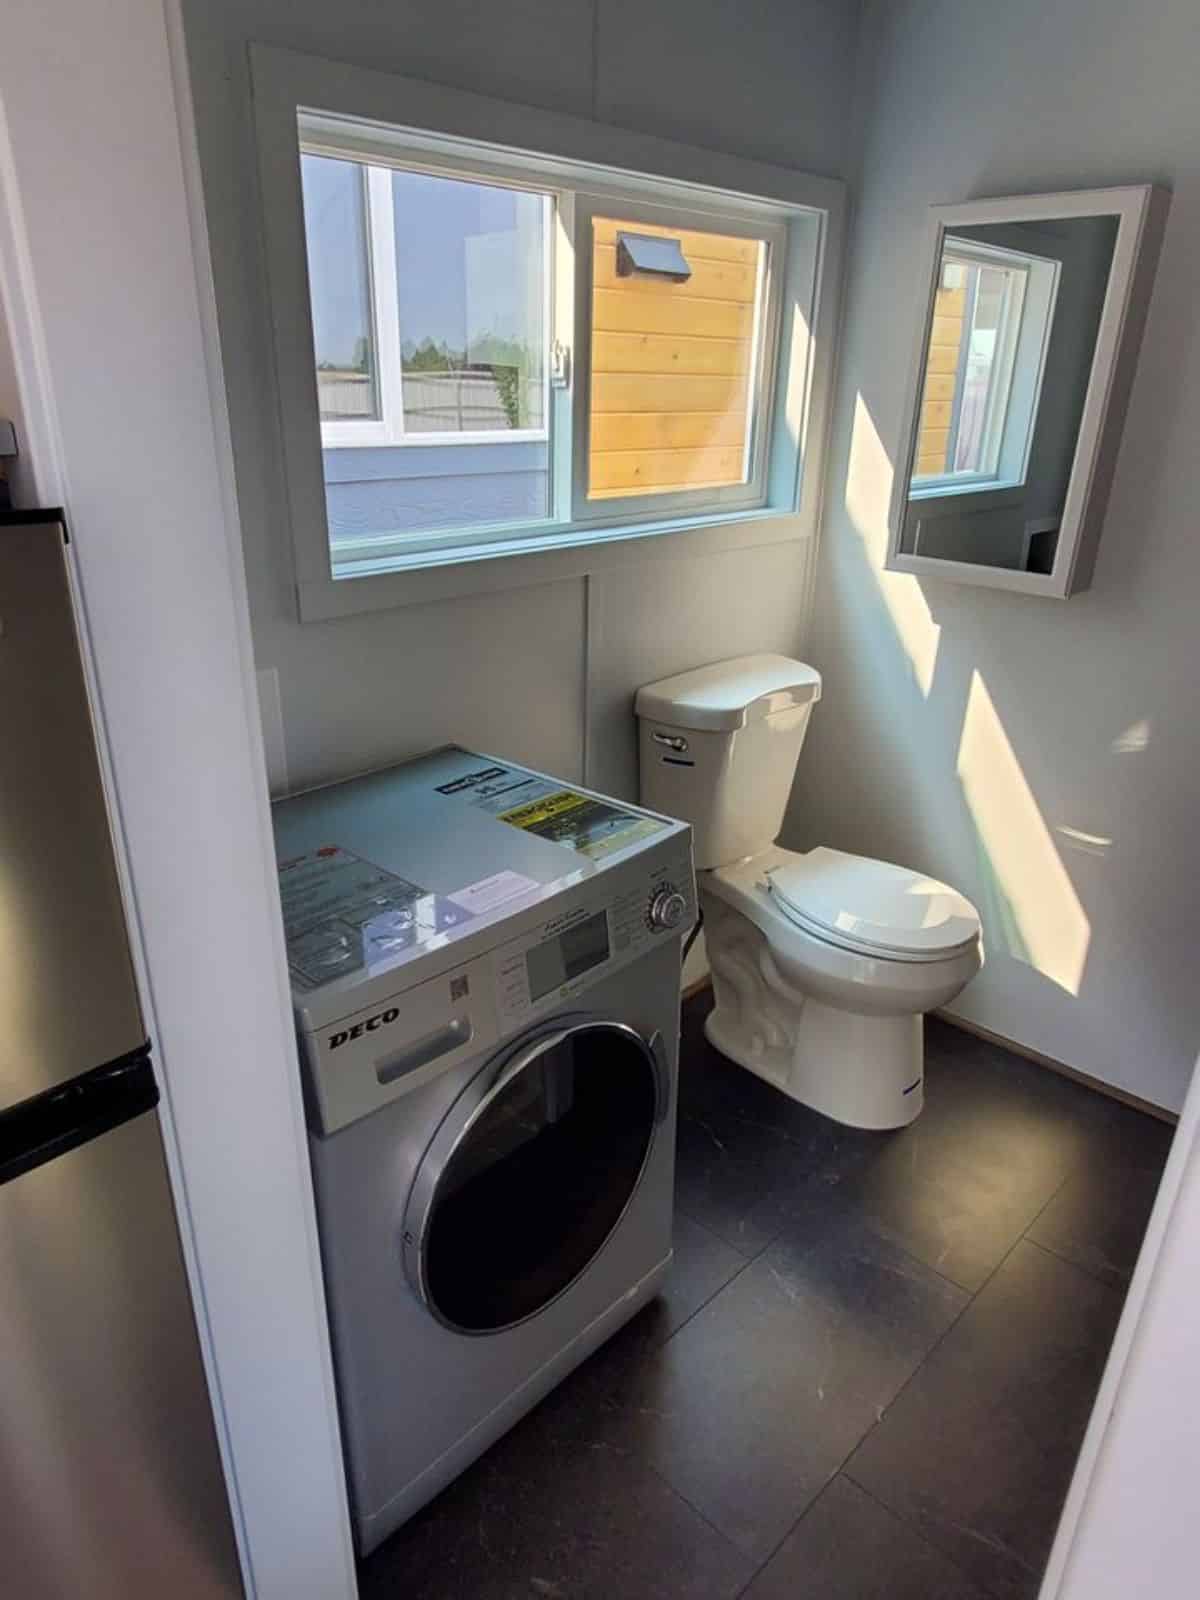 Neat and clean bathroom of Brand-New Tiny Home with washer dryer combo installed already included into the deal